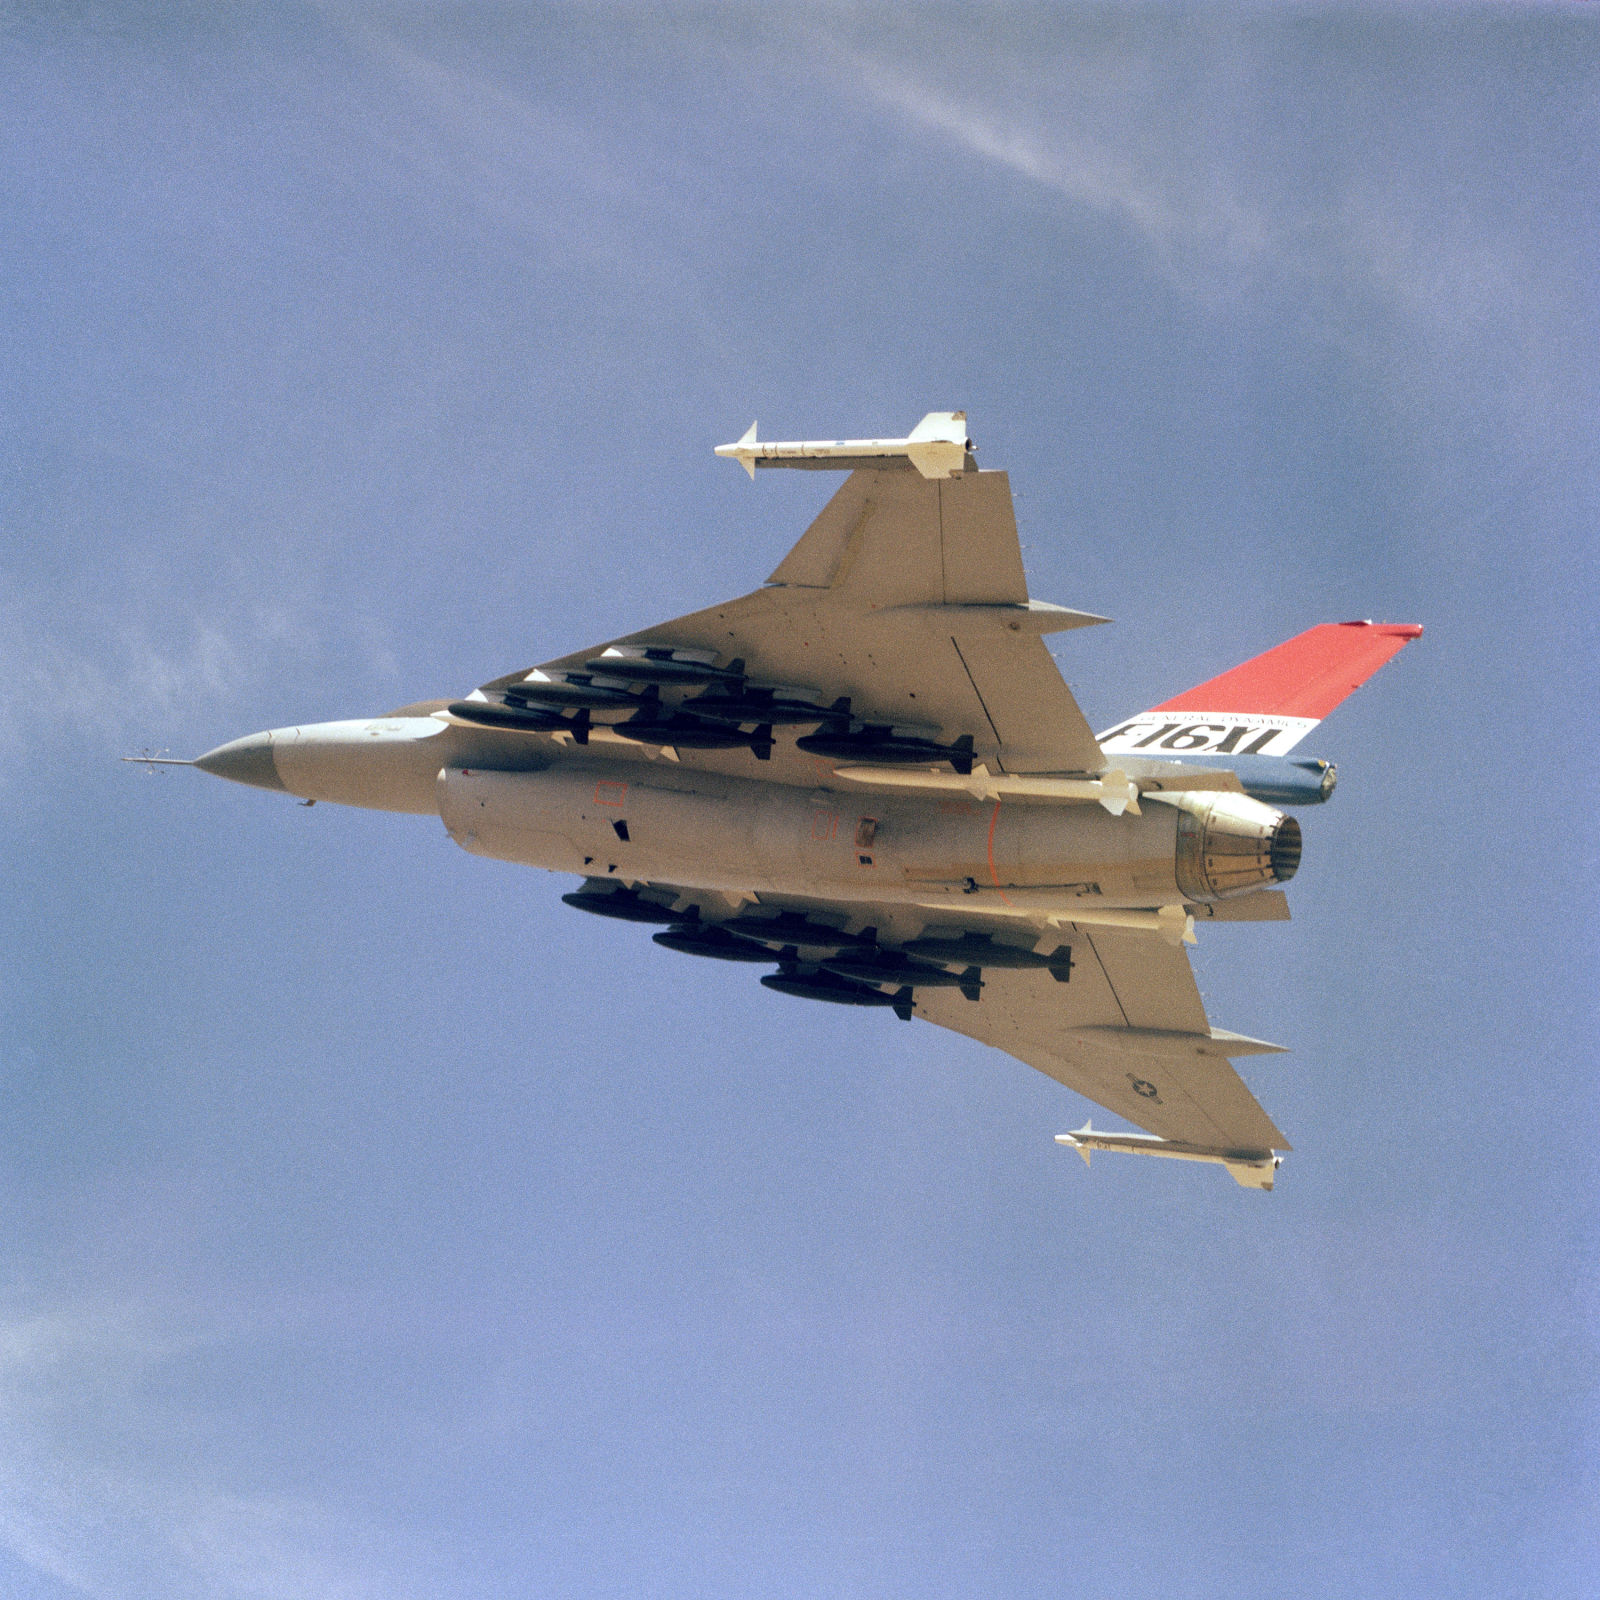 Air-to-air shot of an F-16XL on a demo flight. The XL is armed with two wing tip mounted AIM-9 Sidewinder and four fuselage mounted AIM-7 Sparrow missiles along with 12 500-pound bombs.